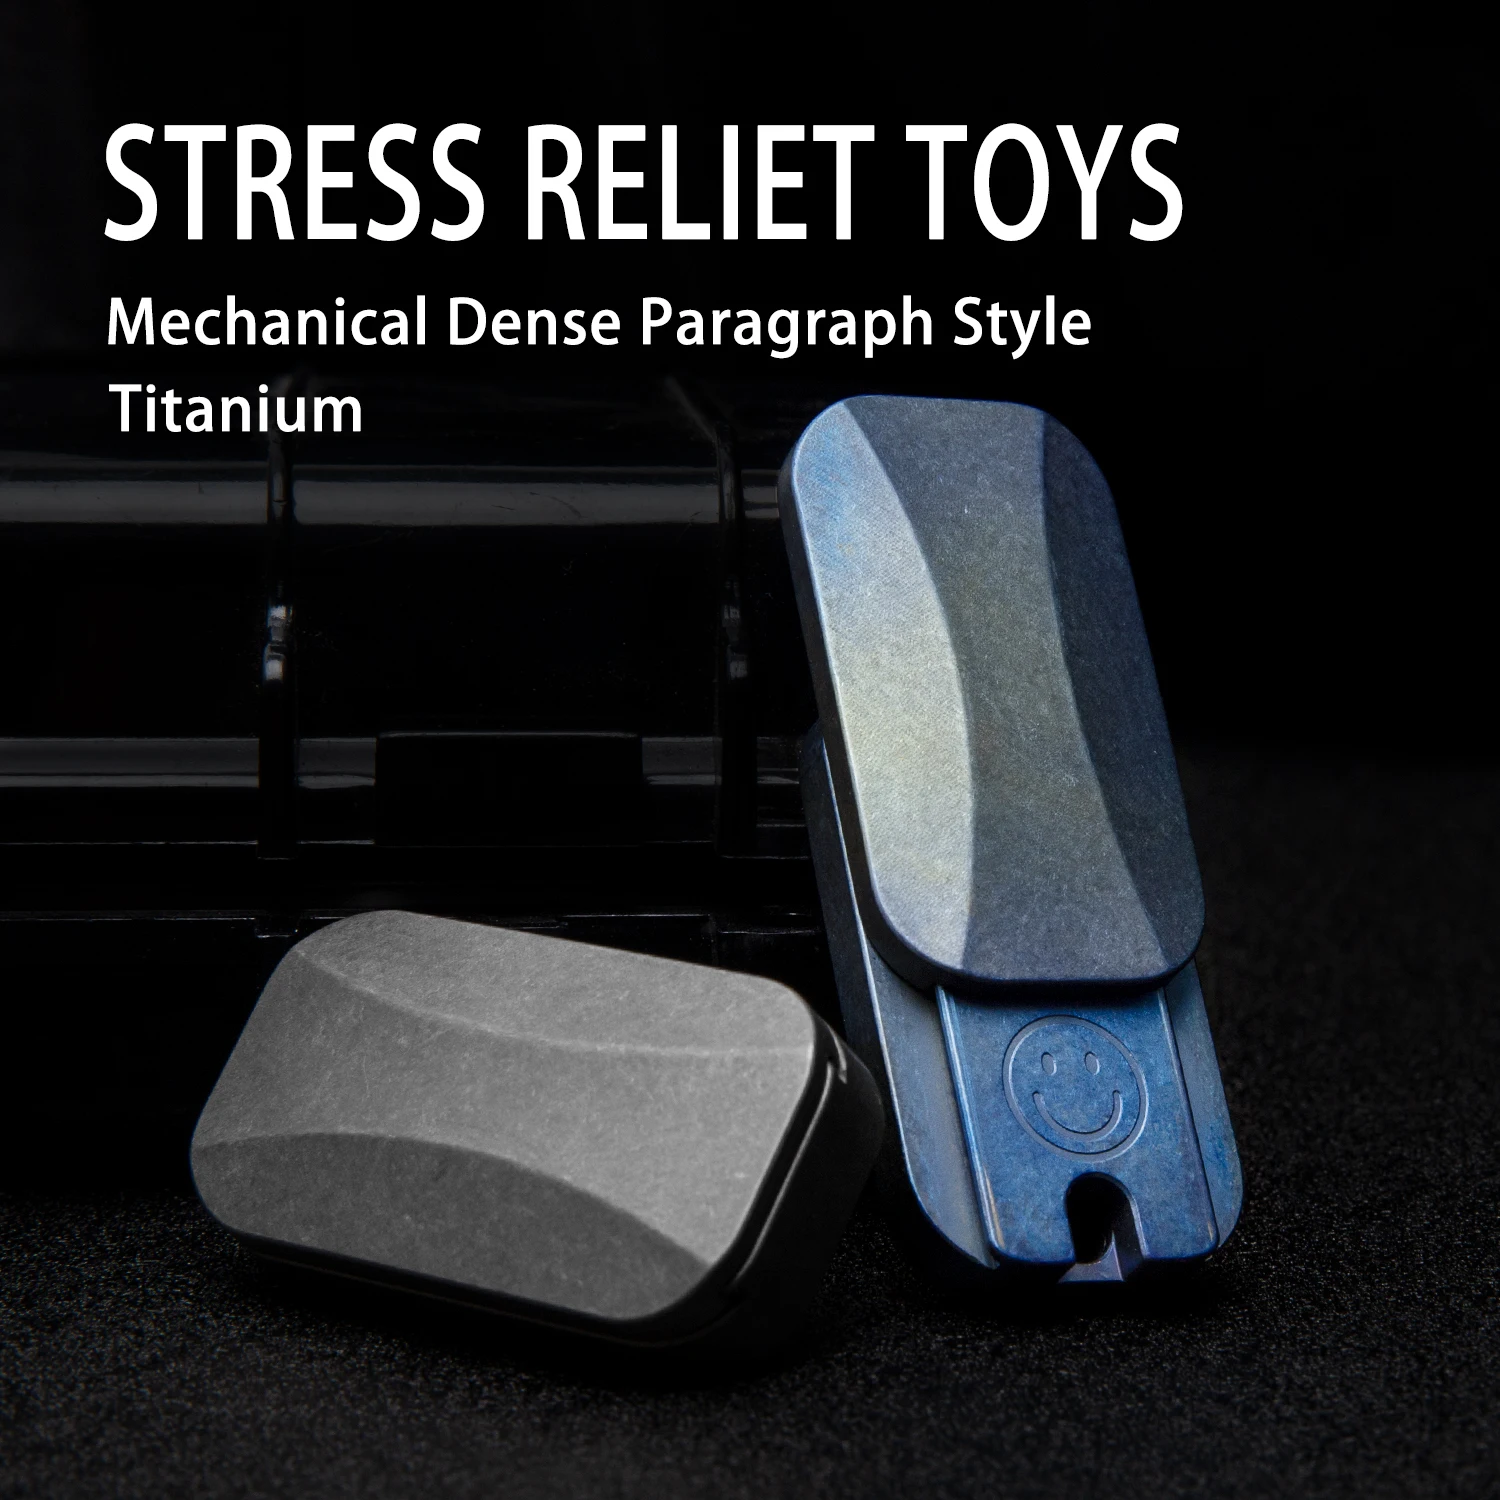 

Titanium Alloy Double Track Dense Machinery Dingding Pushing Card Fingertip Gyroscope Stress Relief Toy EDC Fidget Metal Toy